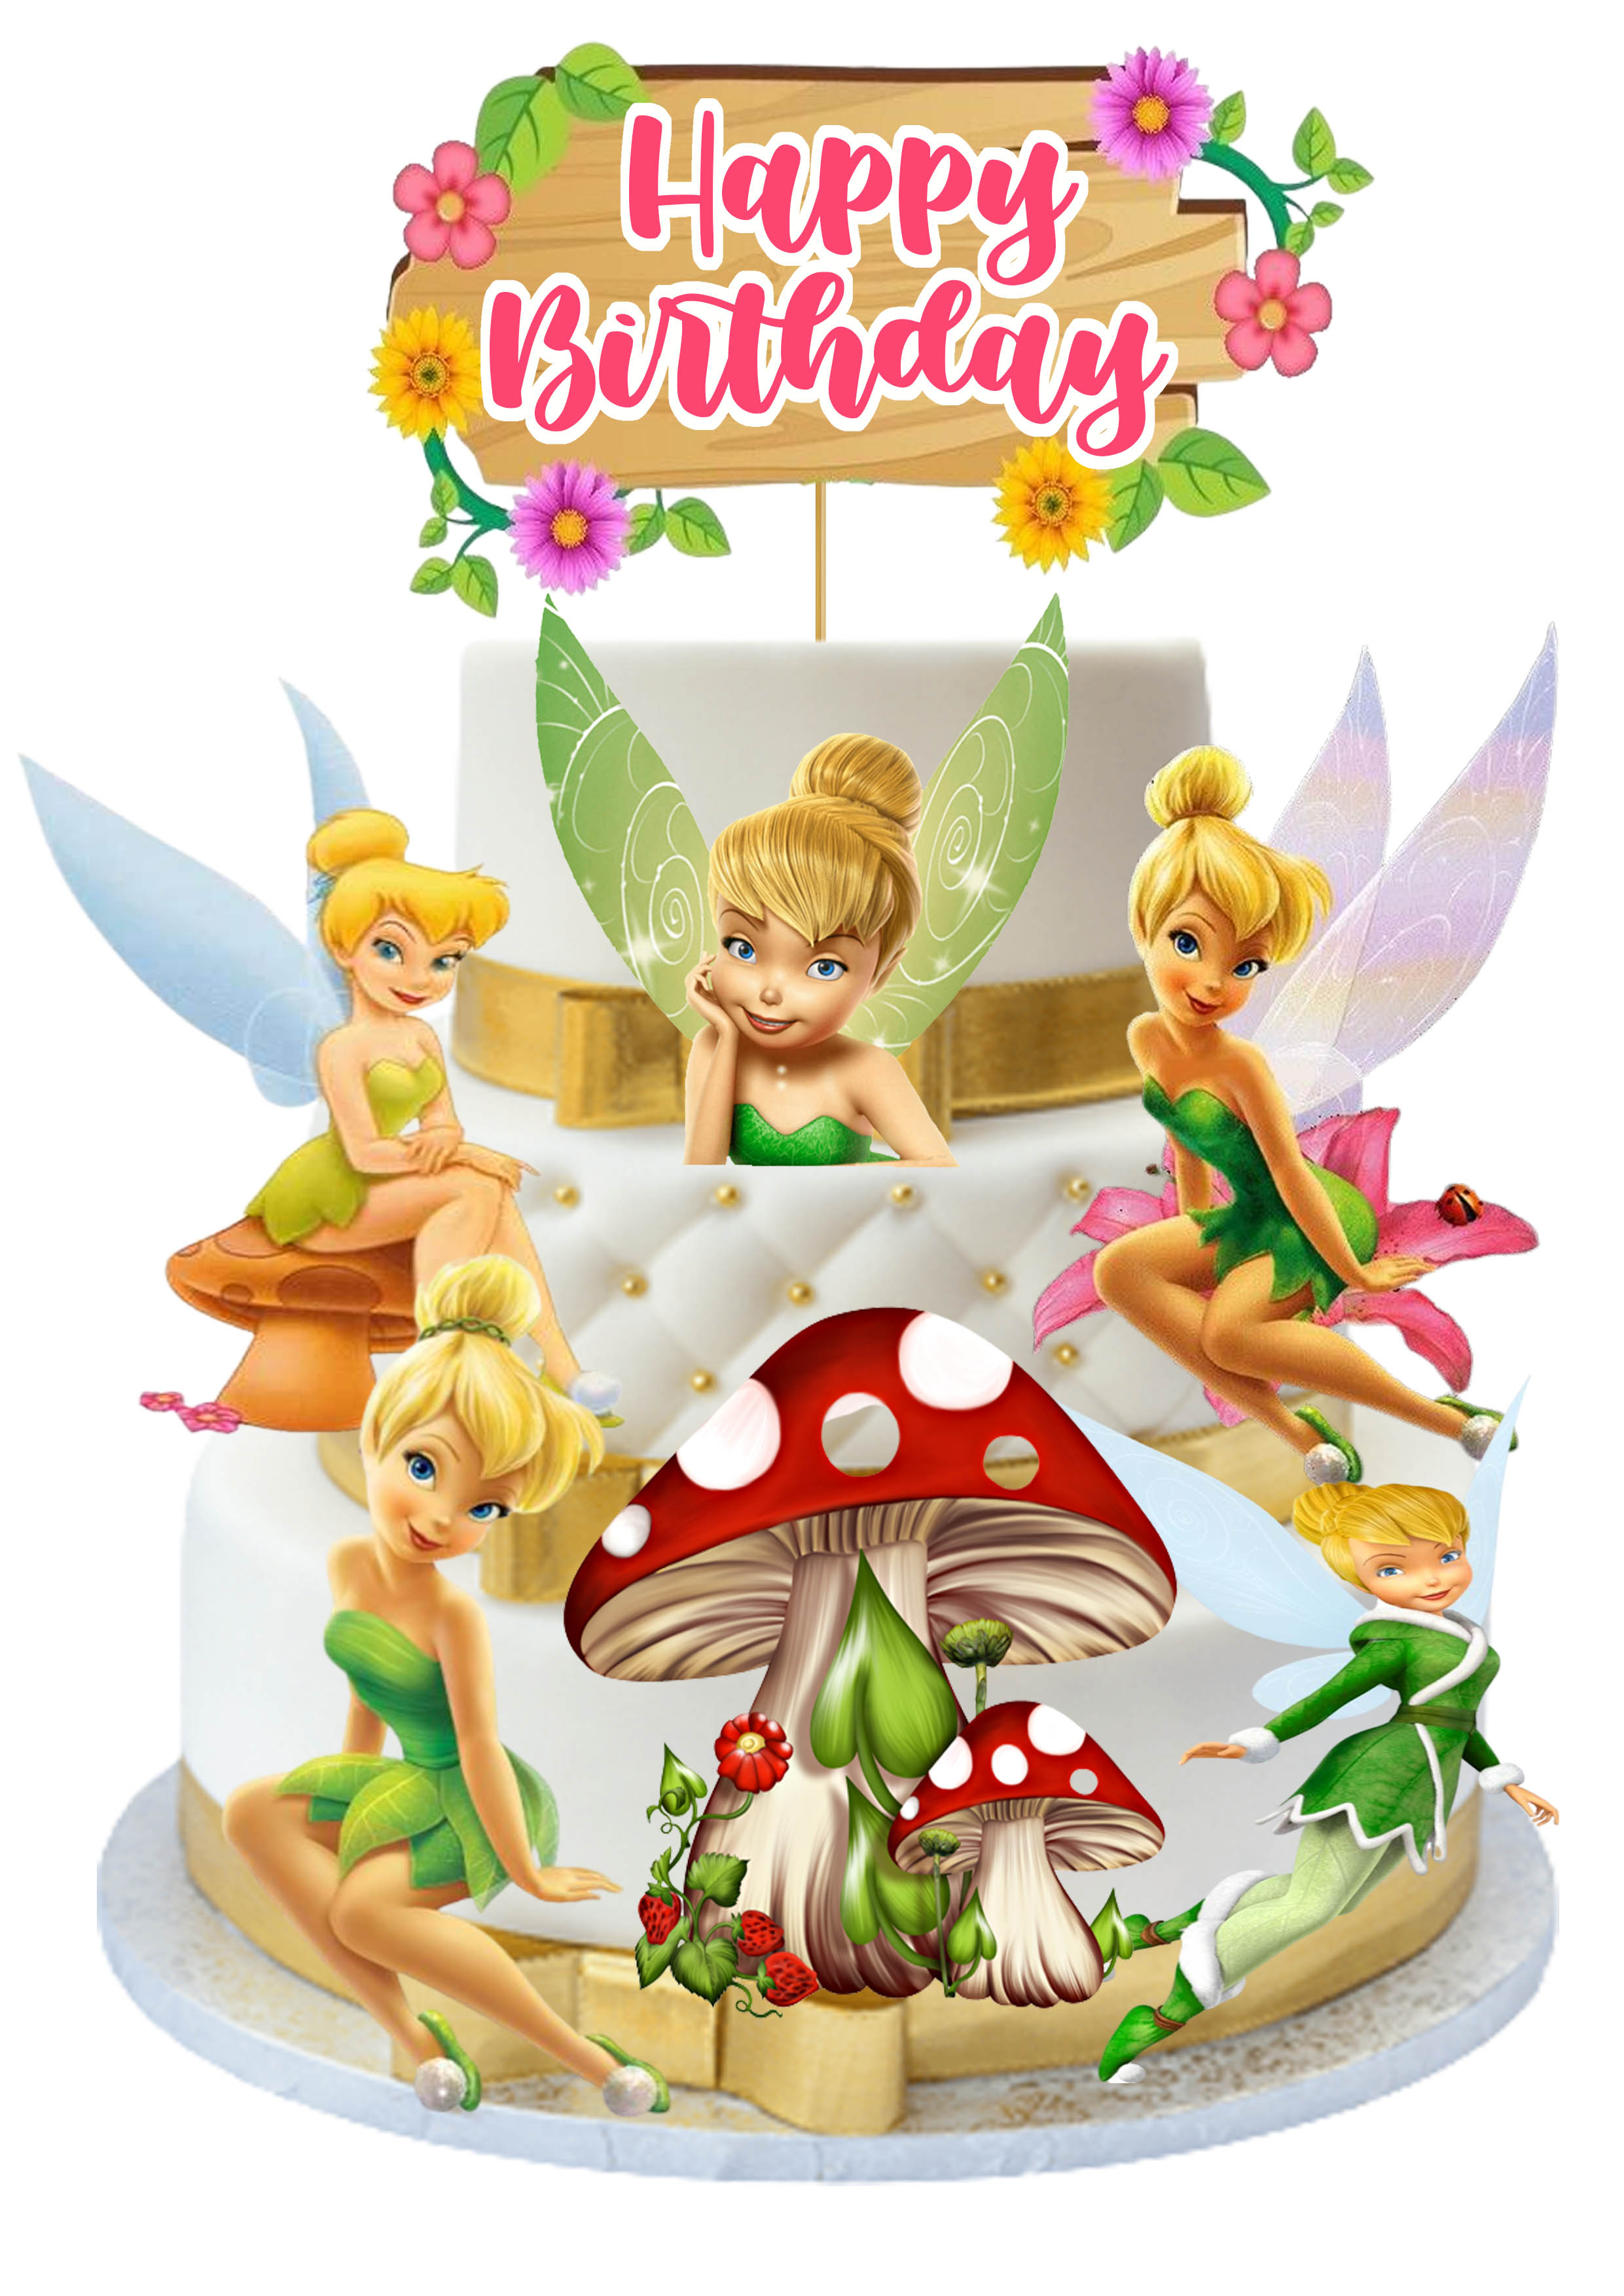 Miniature tinkerbell and friends figurine – Gift Catchers